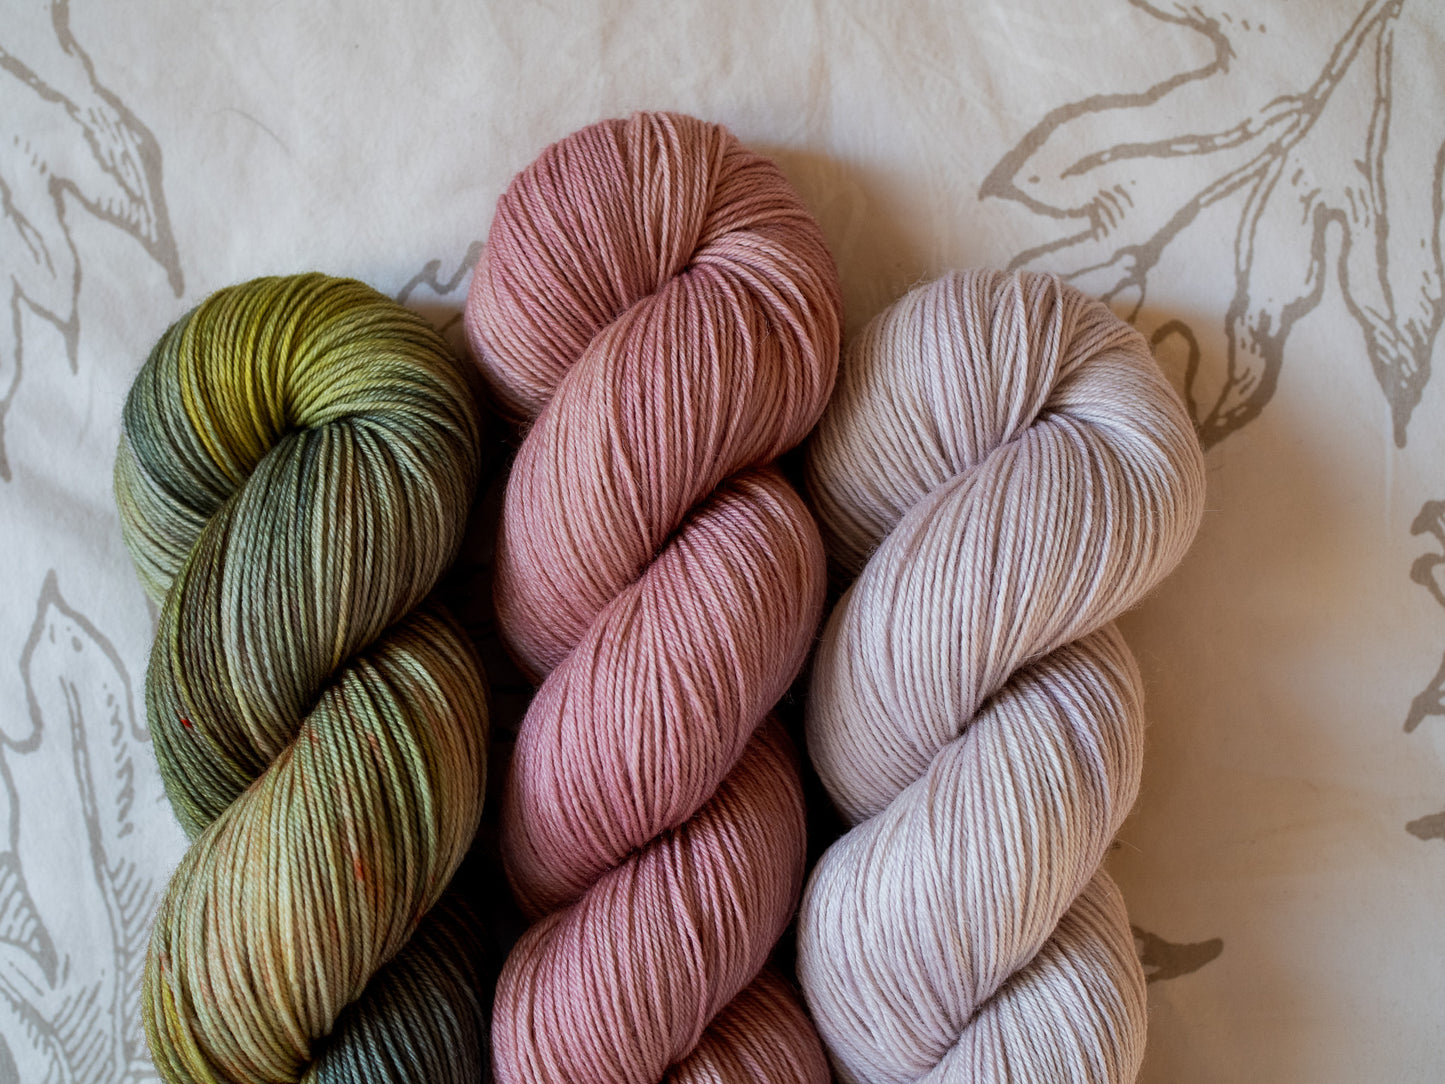 Christmas all year long - Monthly 3 Skein Set Subscription - April